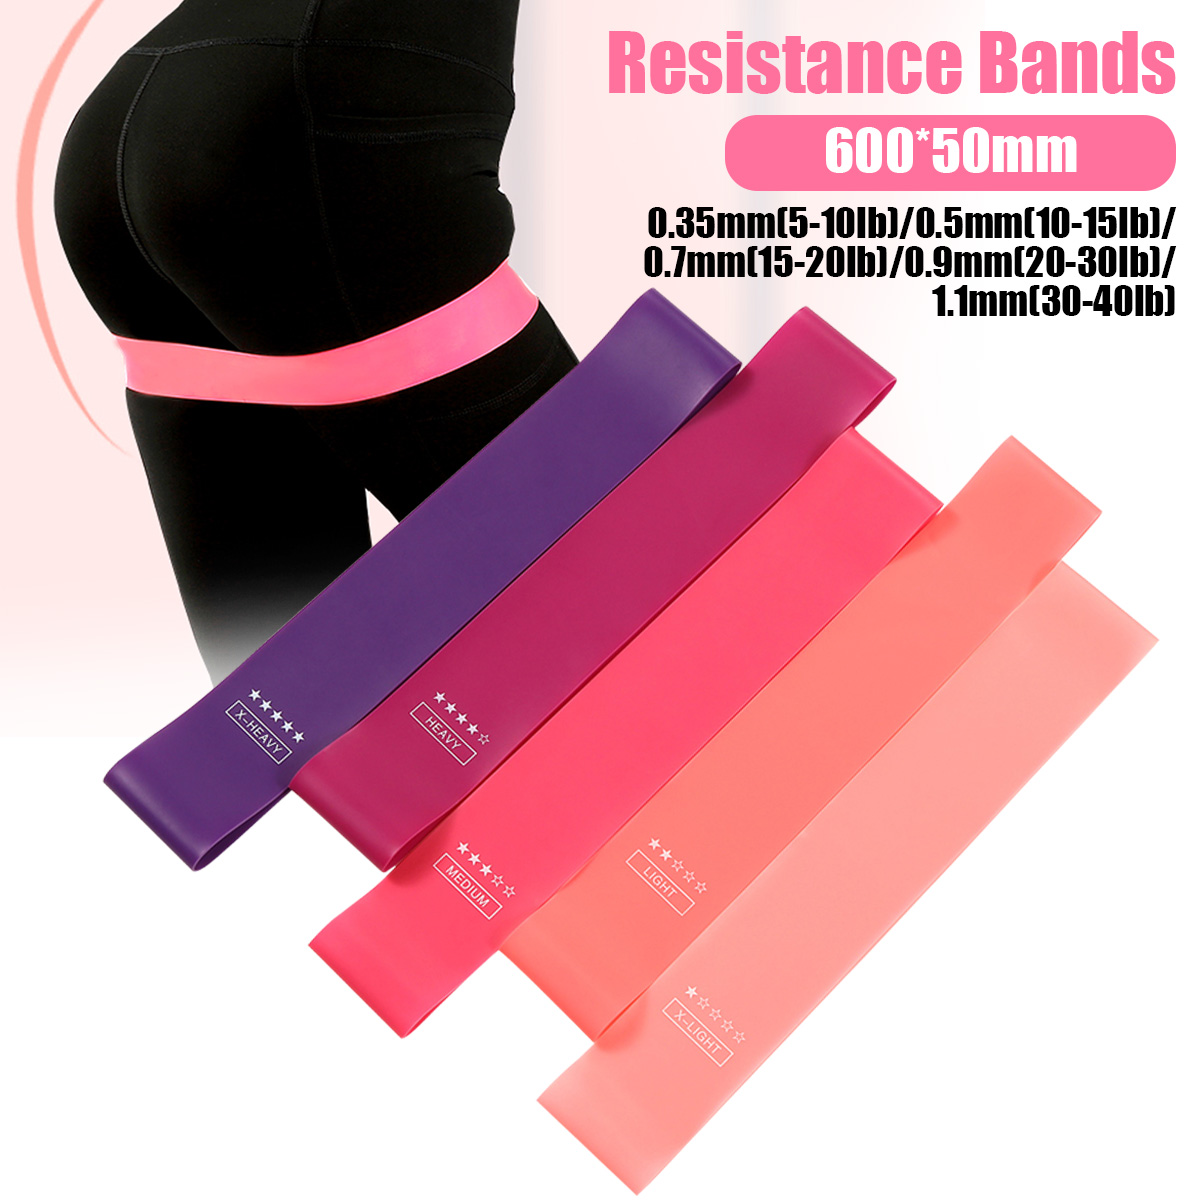 15pcs-Latex-Resistance-Bands-Strength-Training-Exercise-Fitness-Home-Yoga-60050mm-1678687-4